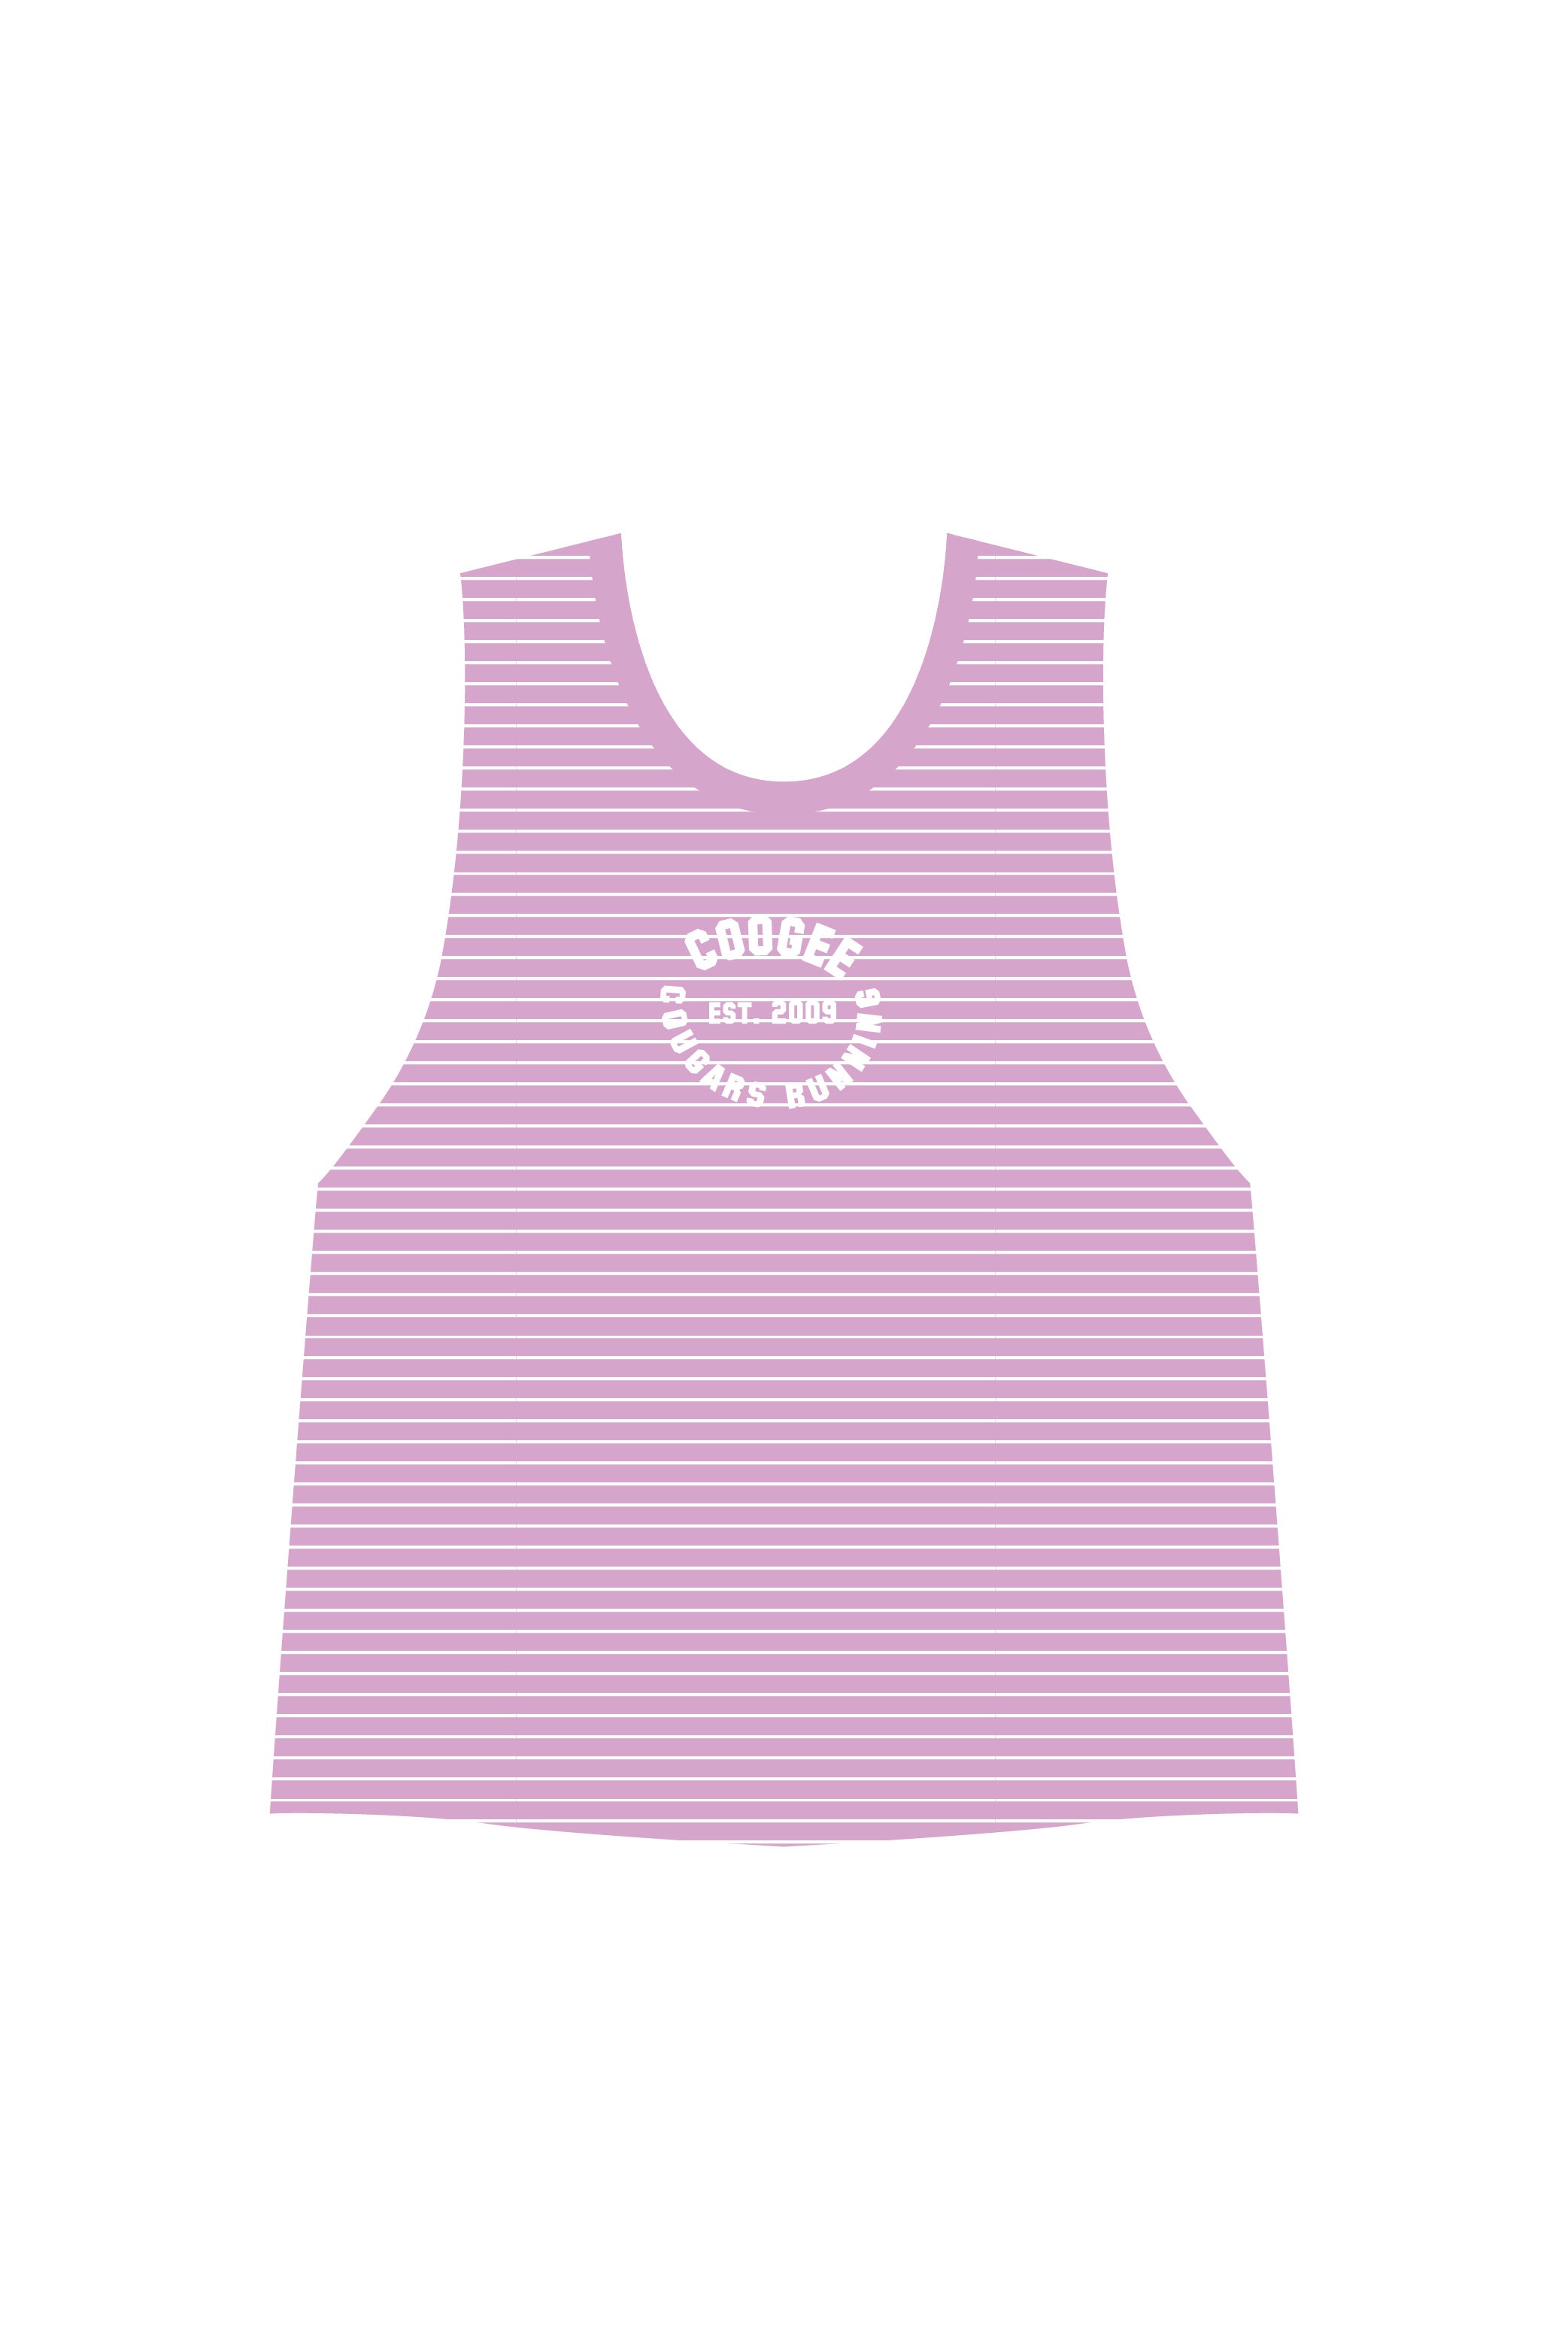 Coogee Cougars Tank Singlet - Purple